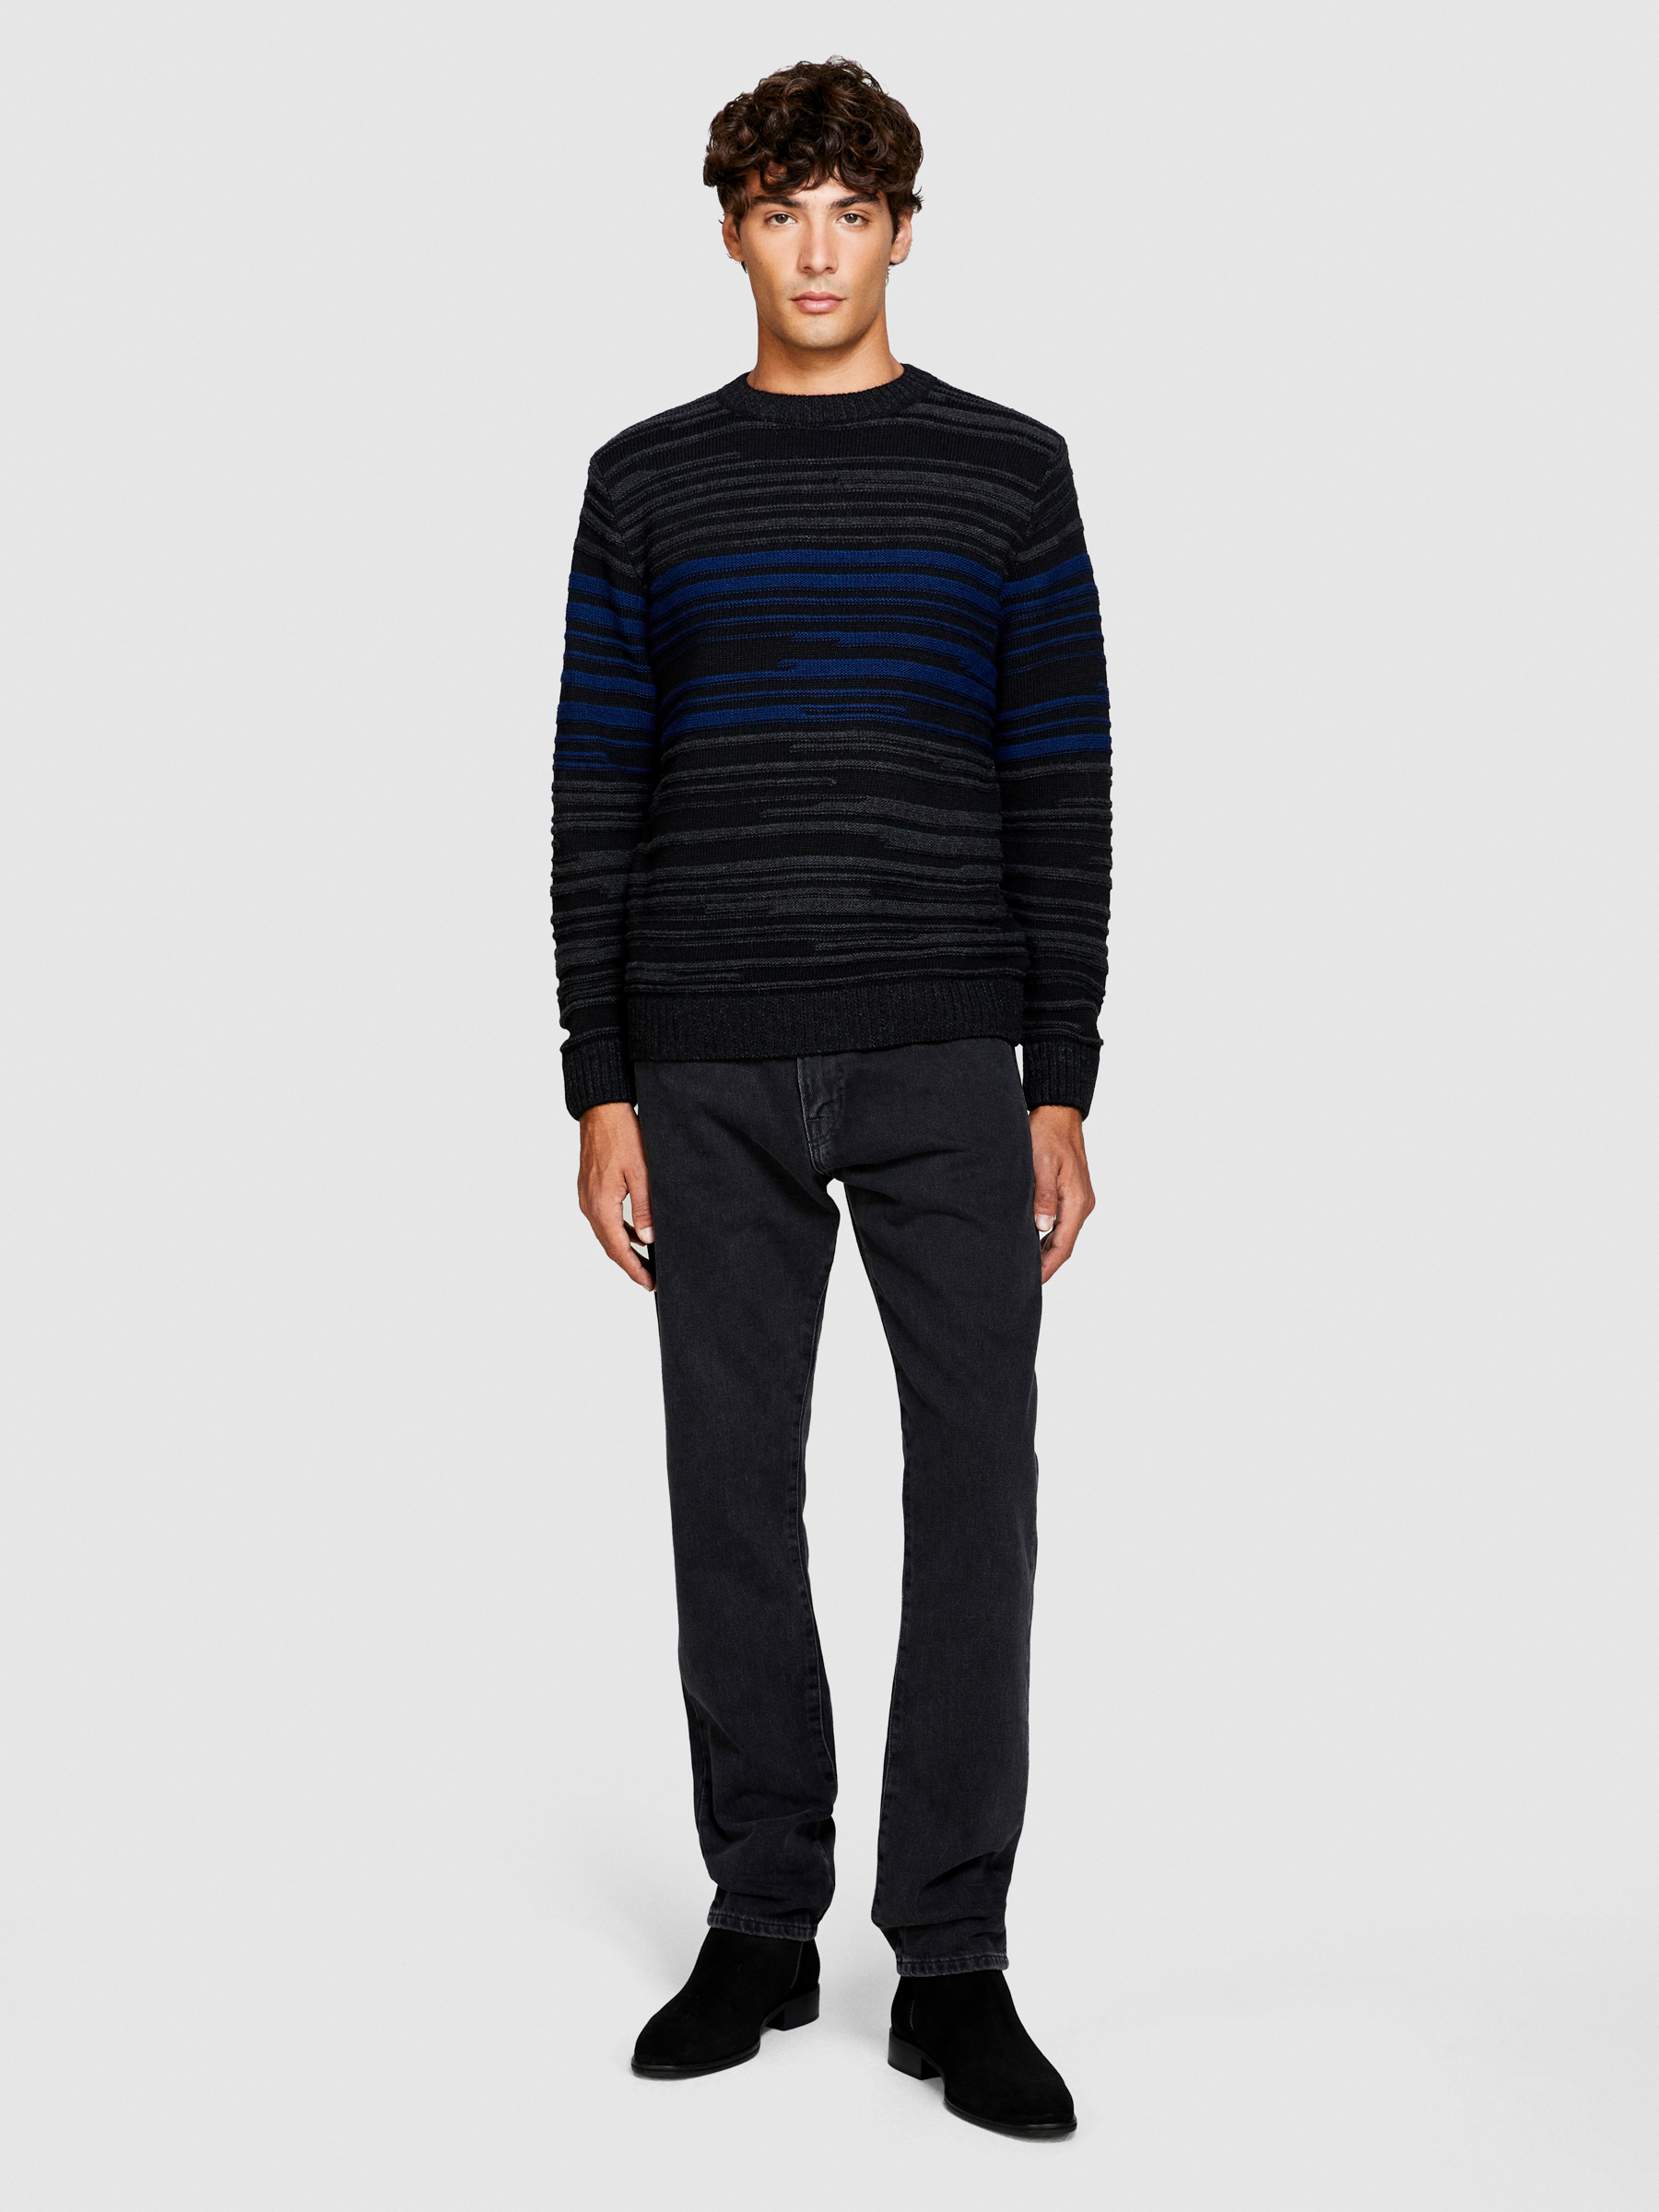 Sisley - Sweater With Stripes, Man, Multi-color, Size: EL